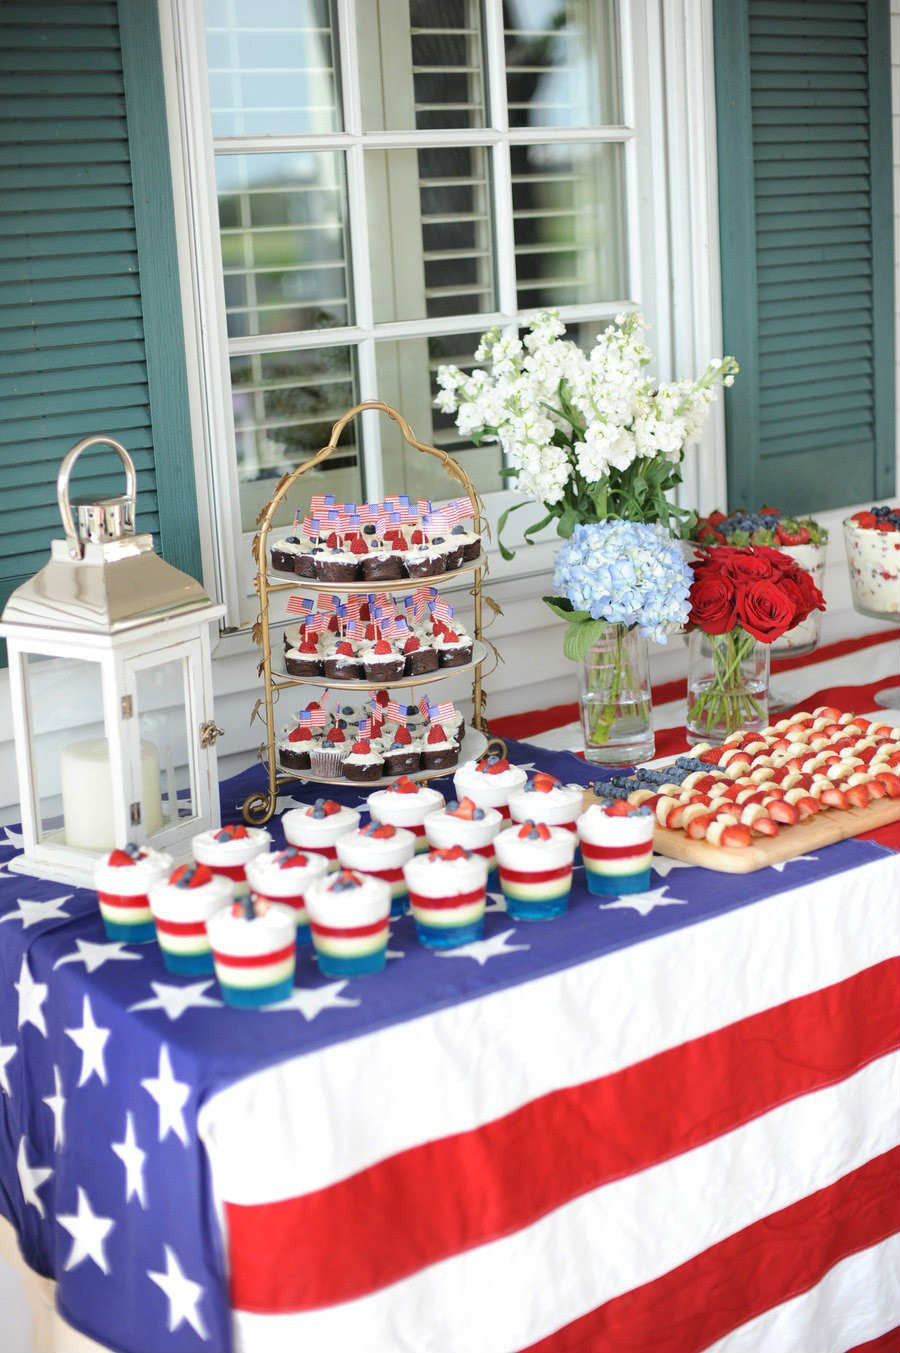 4th Of July Decoration Ideas
 10 Fourth of July Decoration Ideas Tinyme Blog